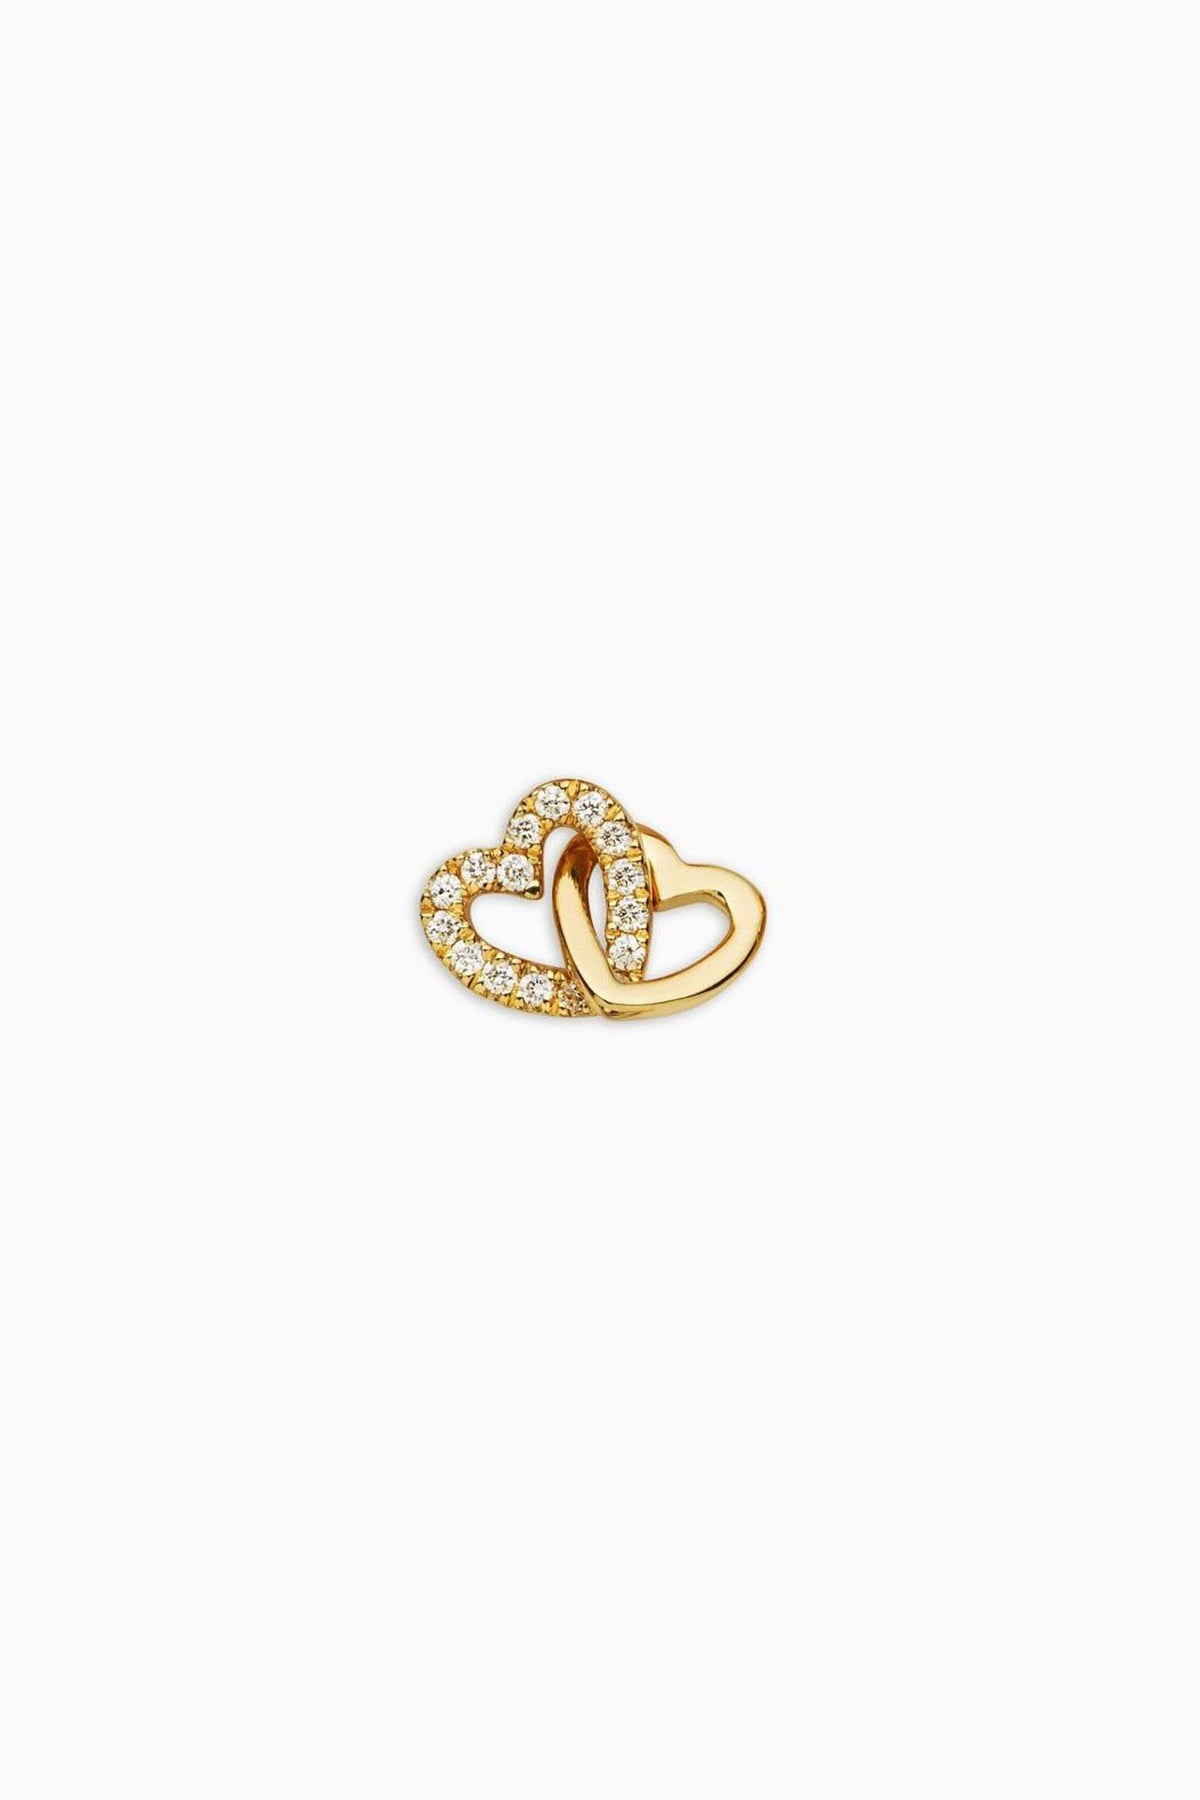 LOQUET LONDON | LINKED HEARTS CHARM